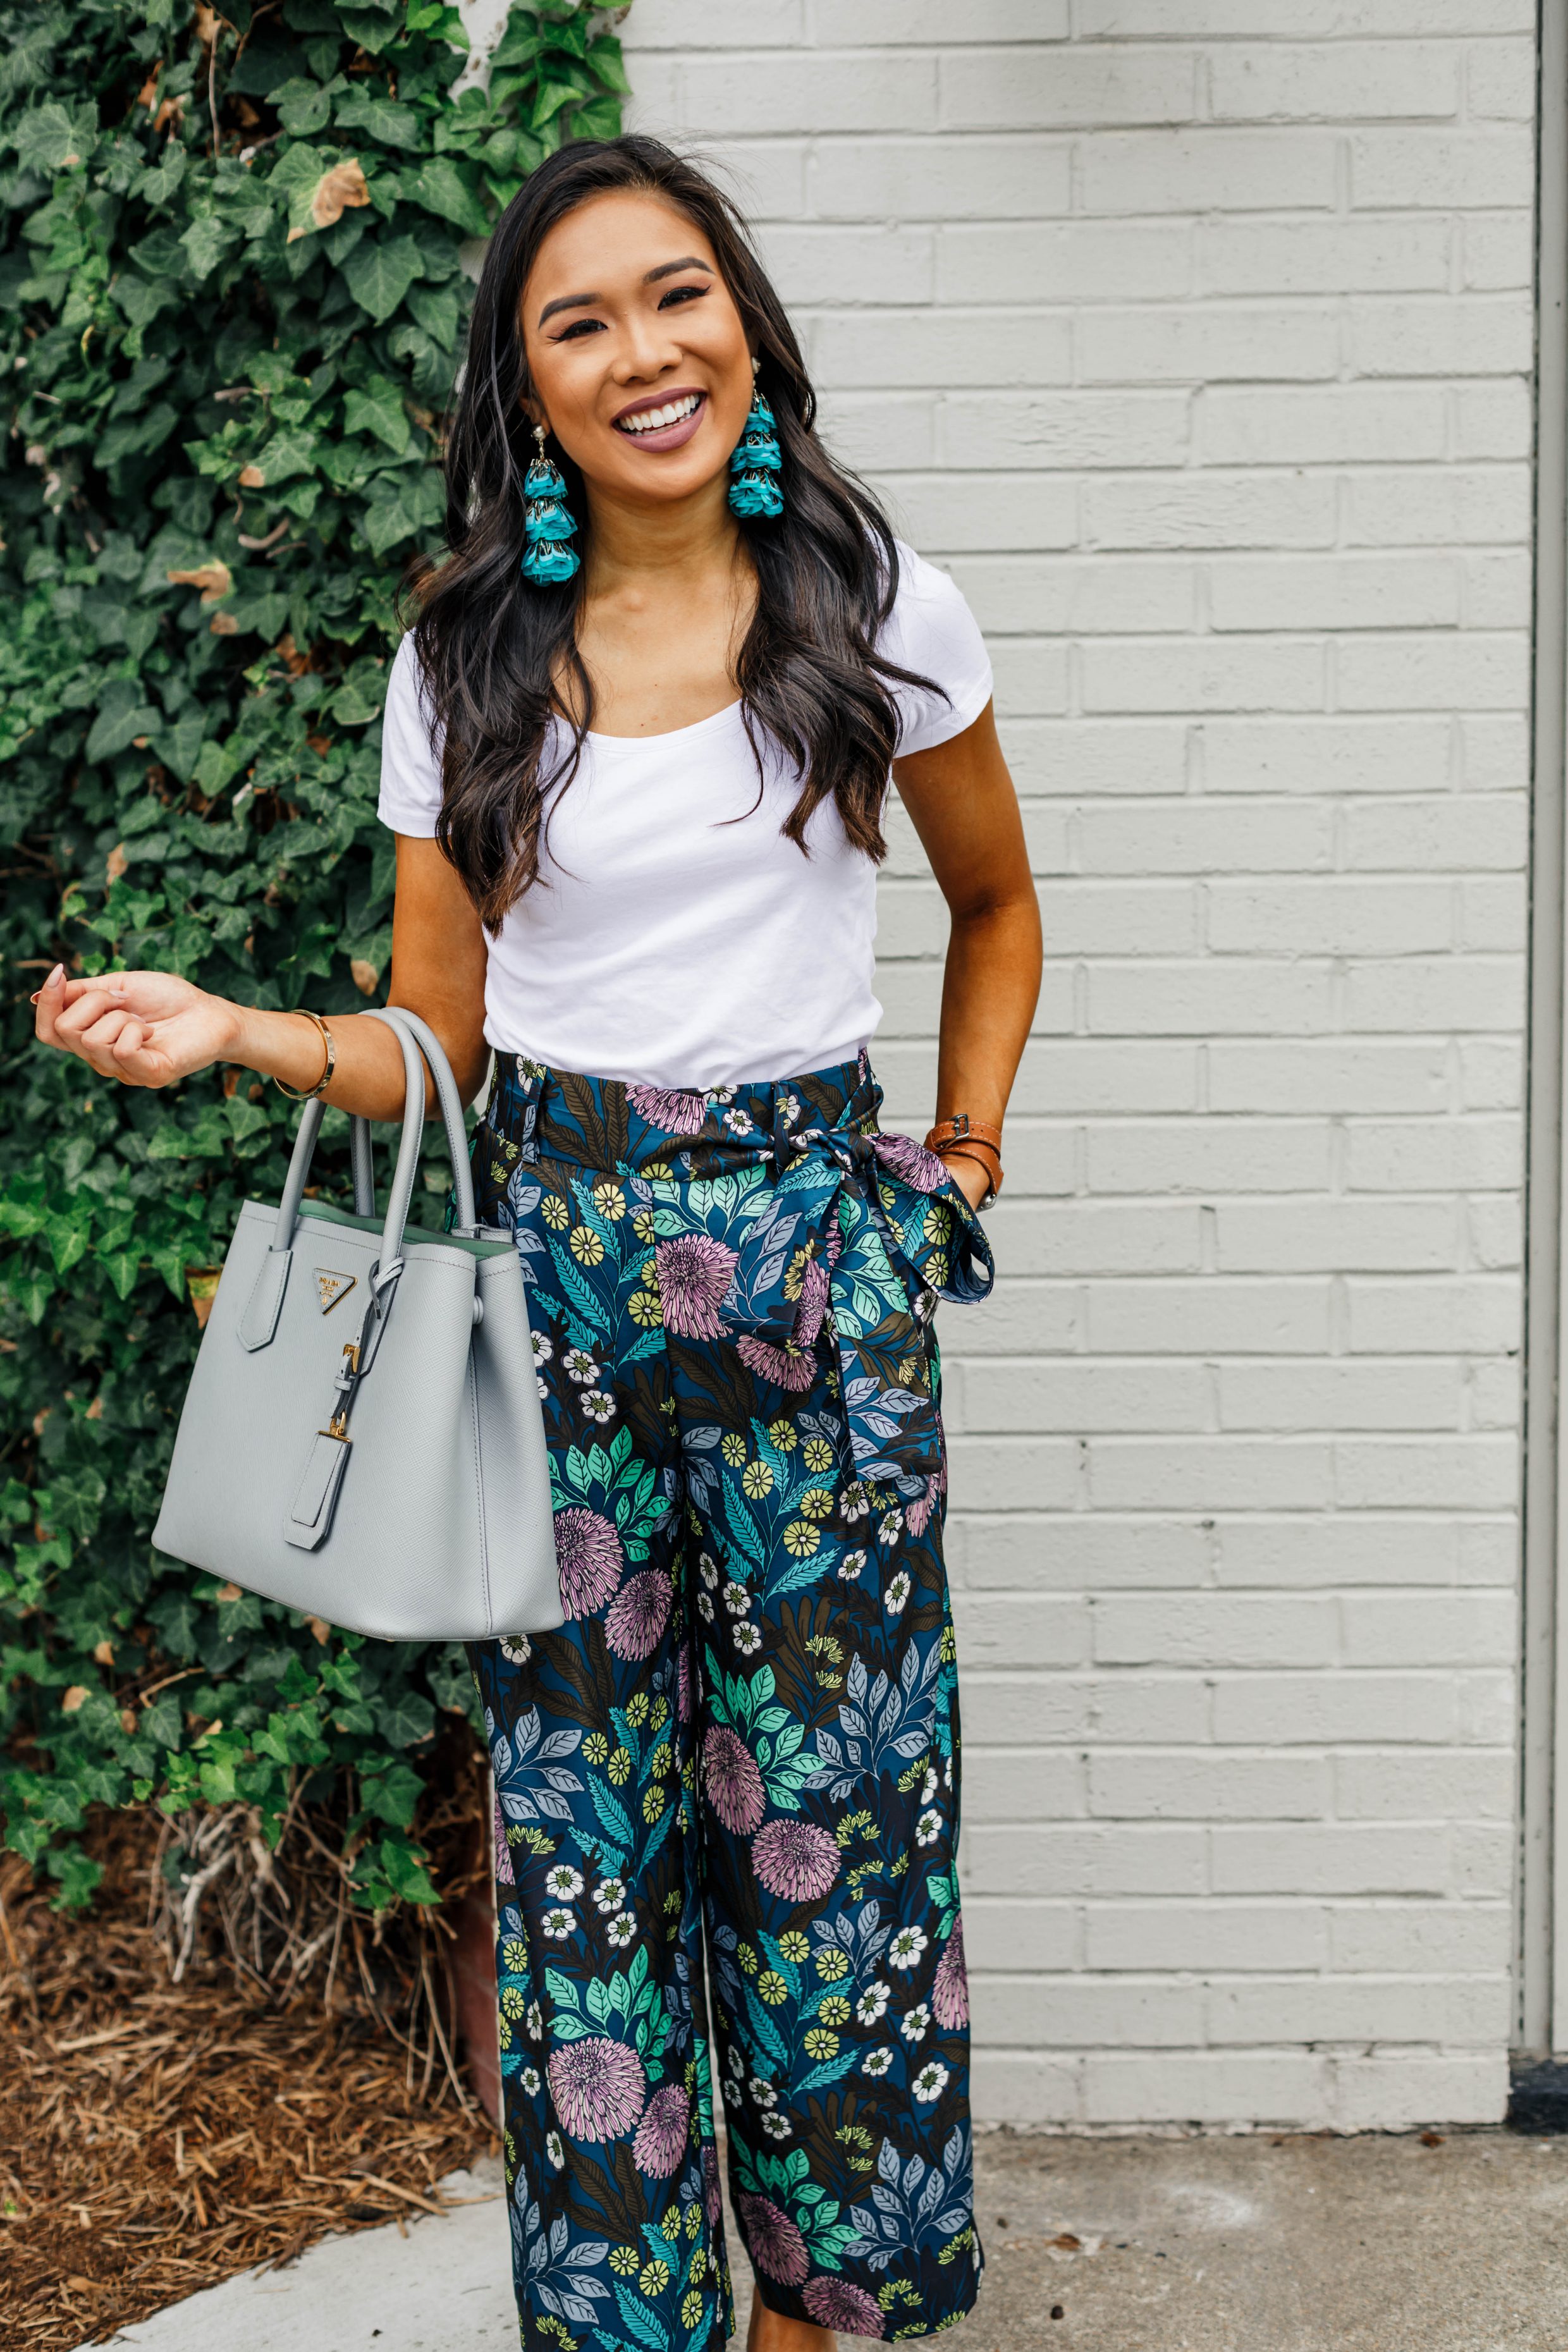 STYLE TALK, HOW TO STYLE WIDE LEG SATIN PANTS